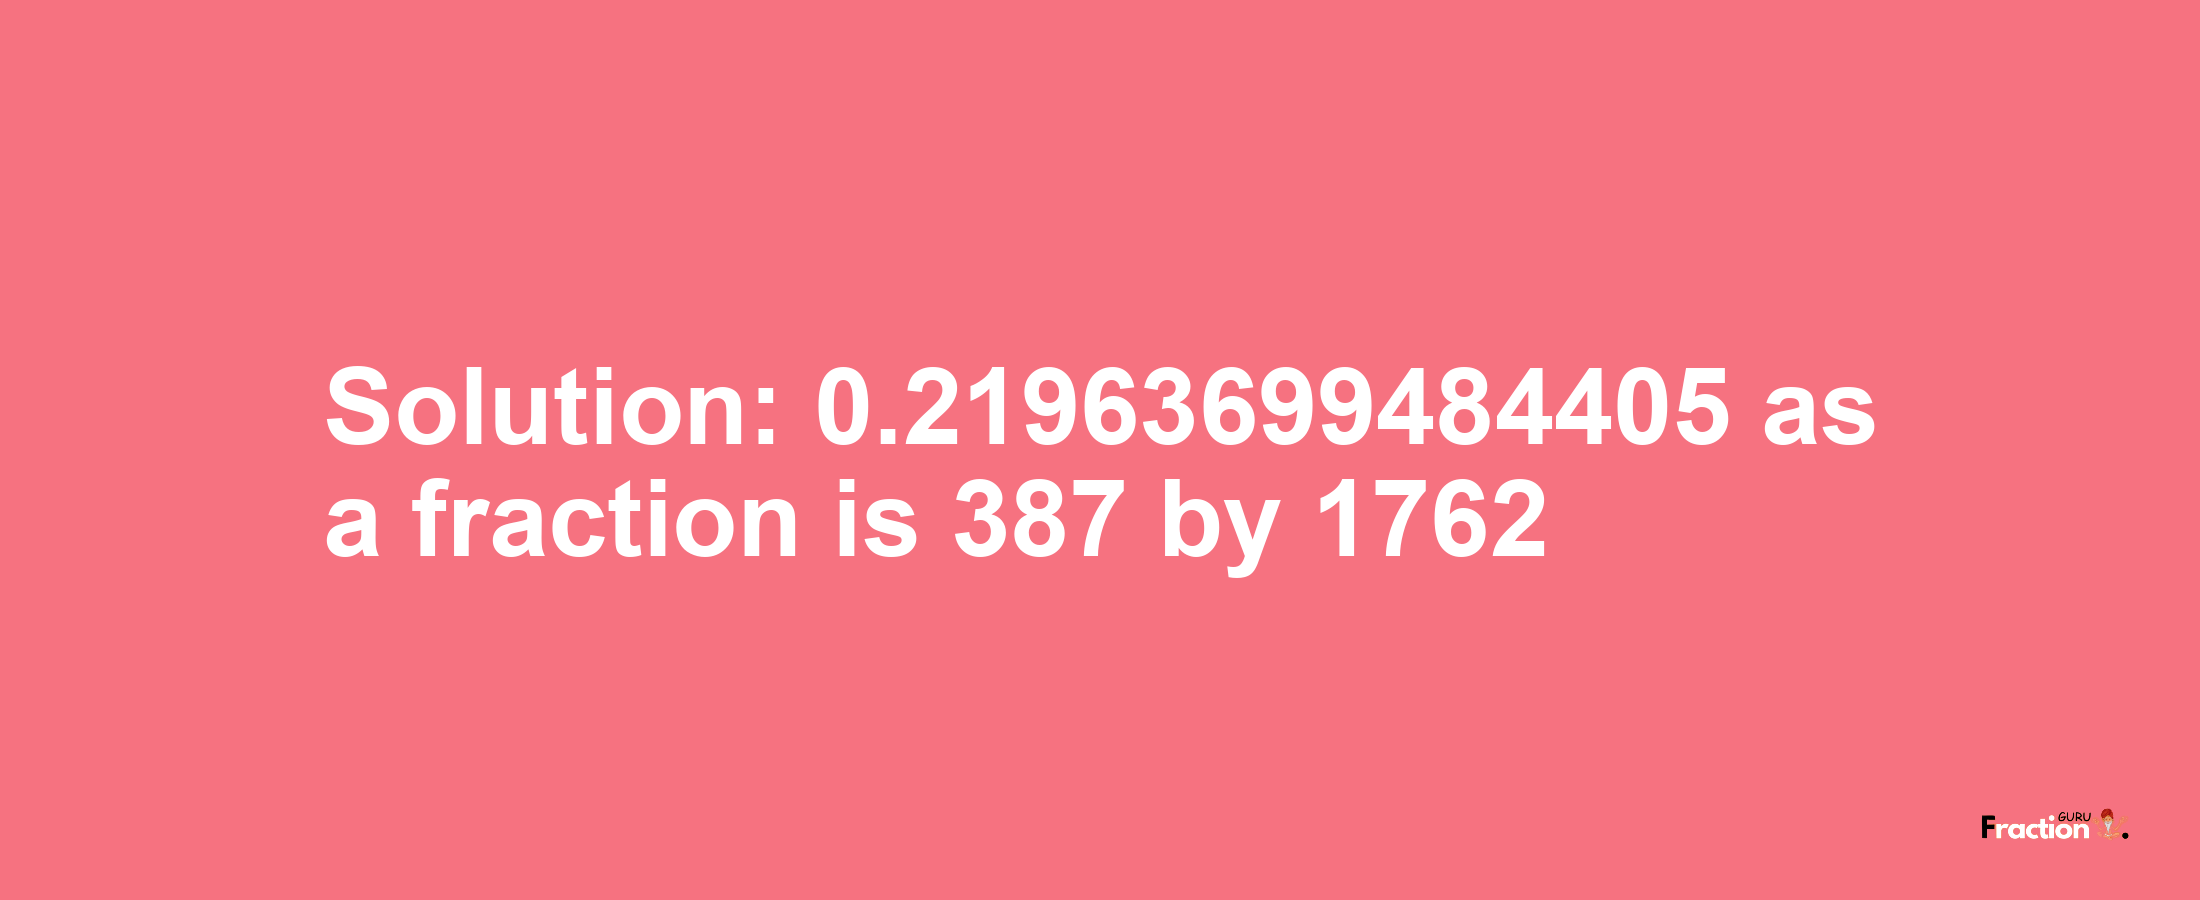 Solution:0.21963699484405 as a fraction is 387/1762